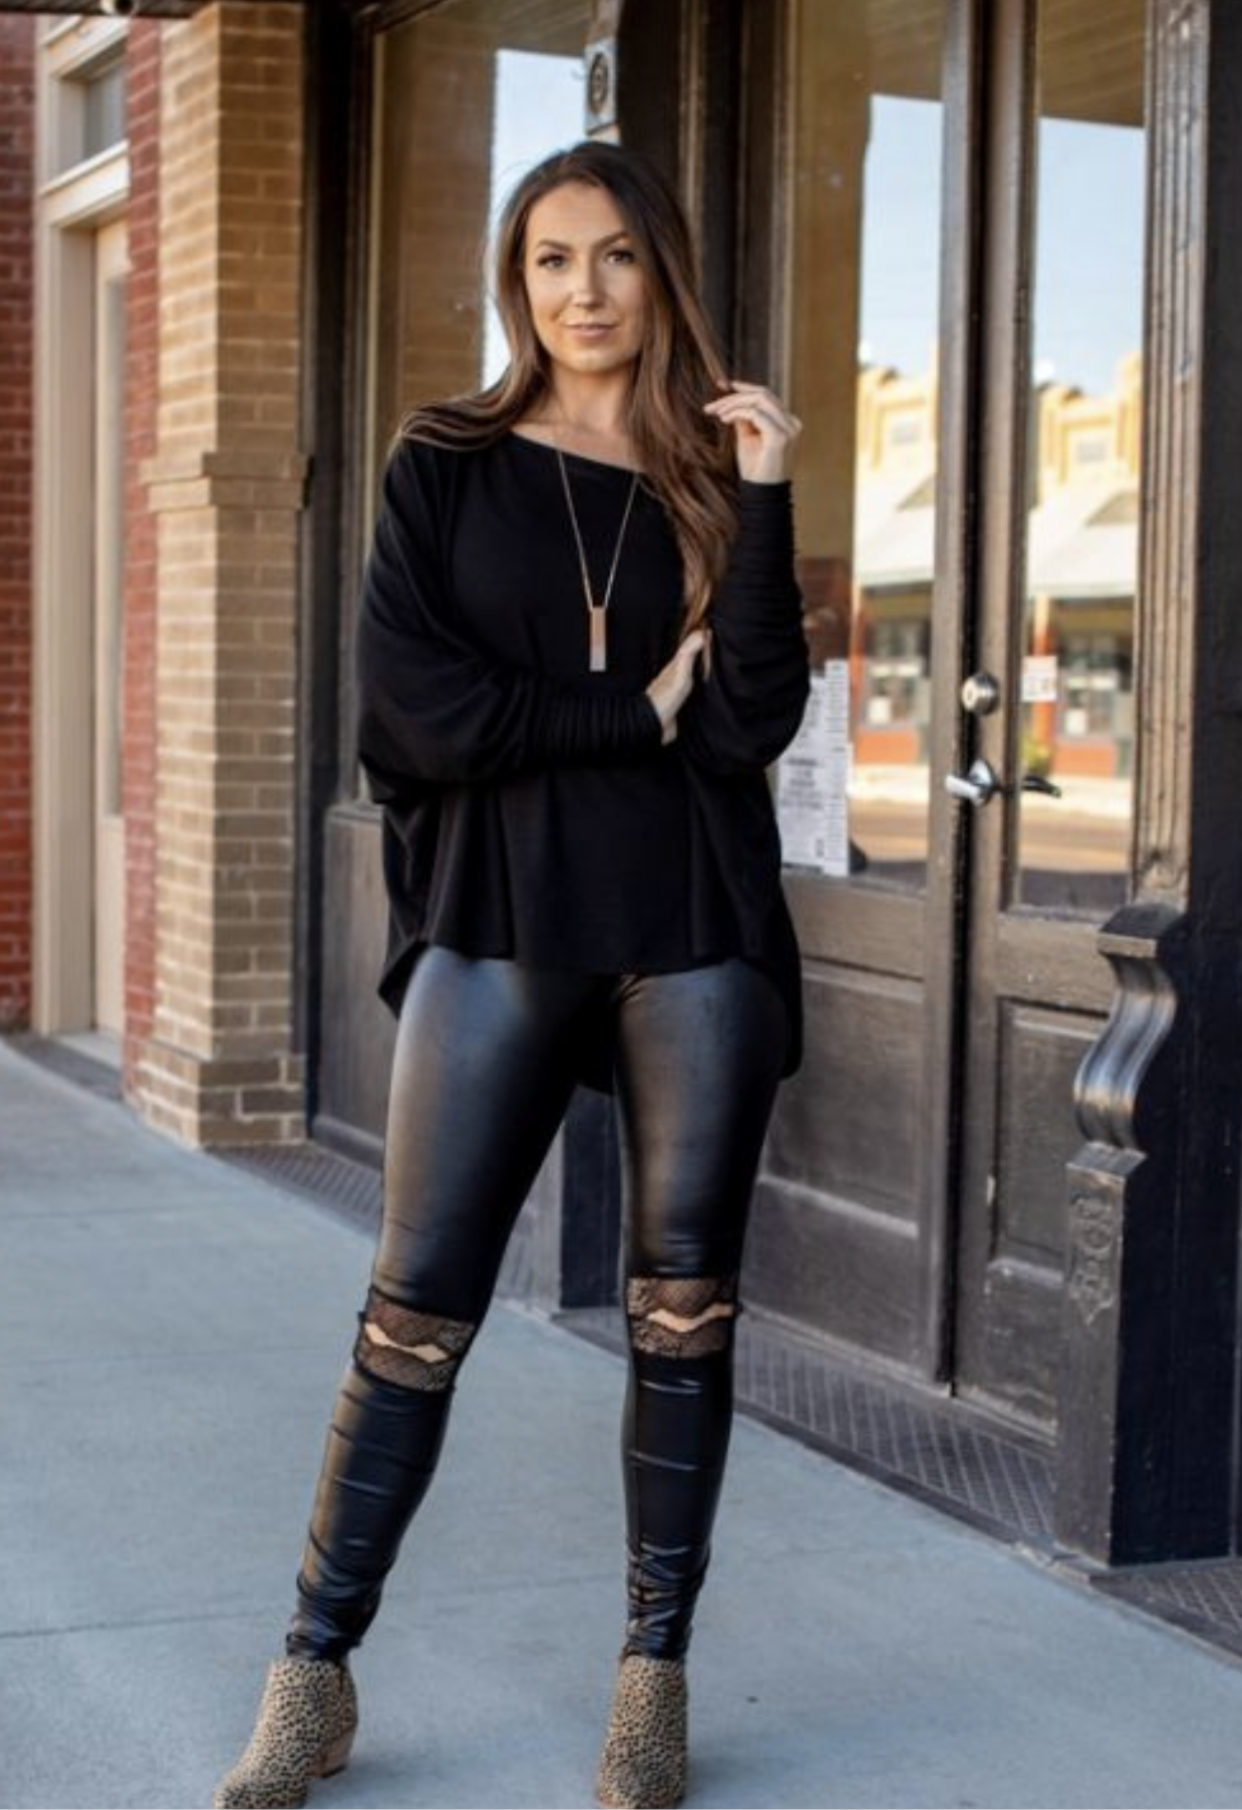 Liquid Leather Leggings Outfits For Women